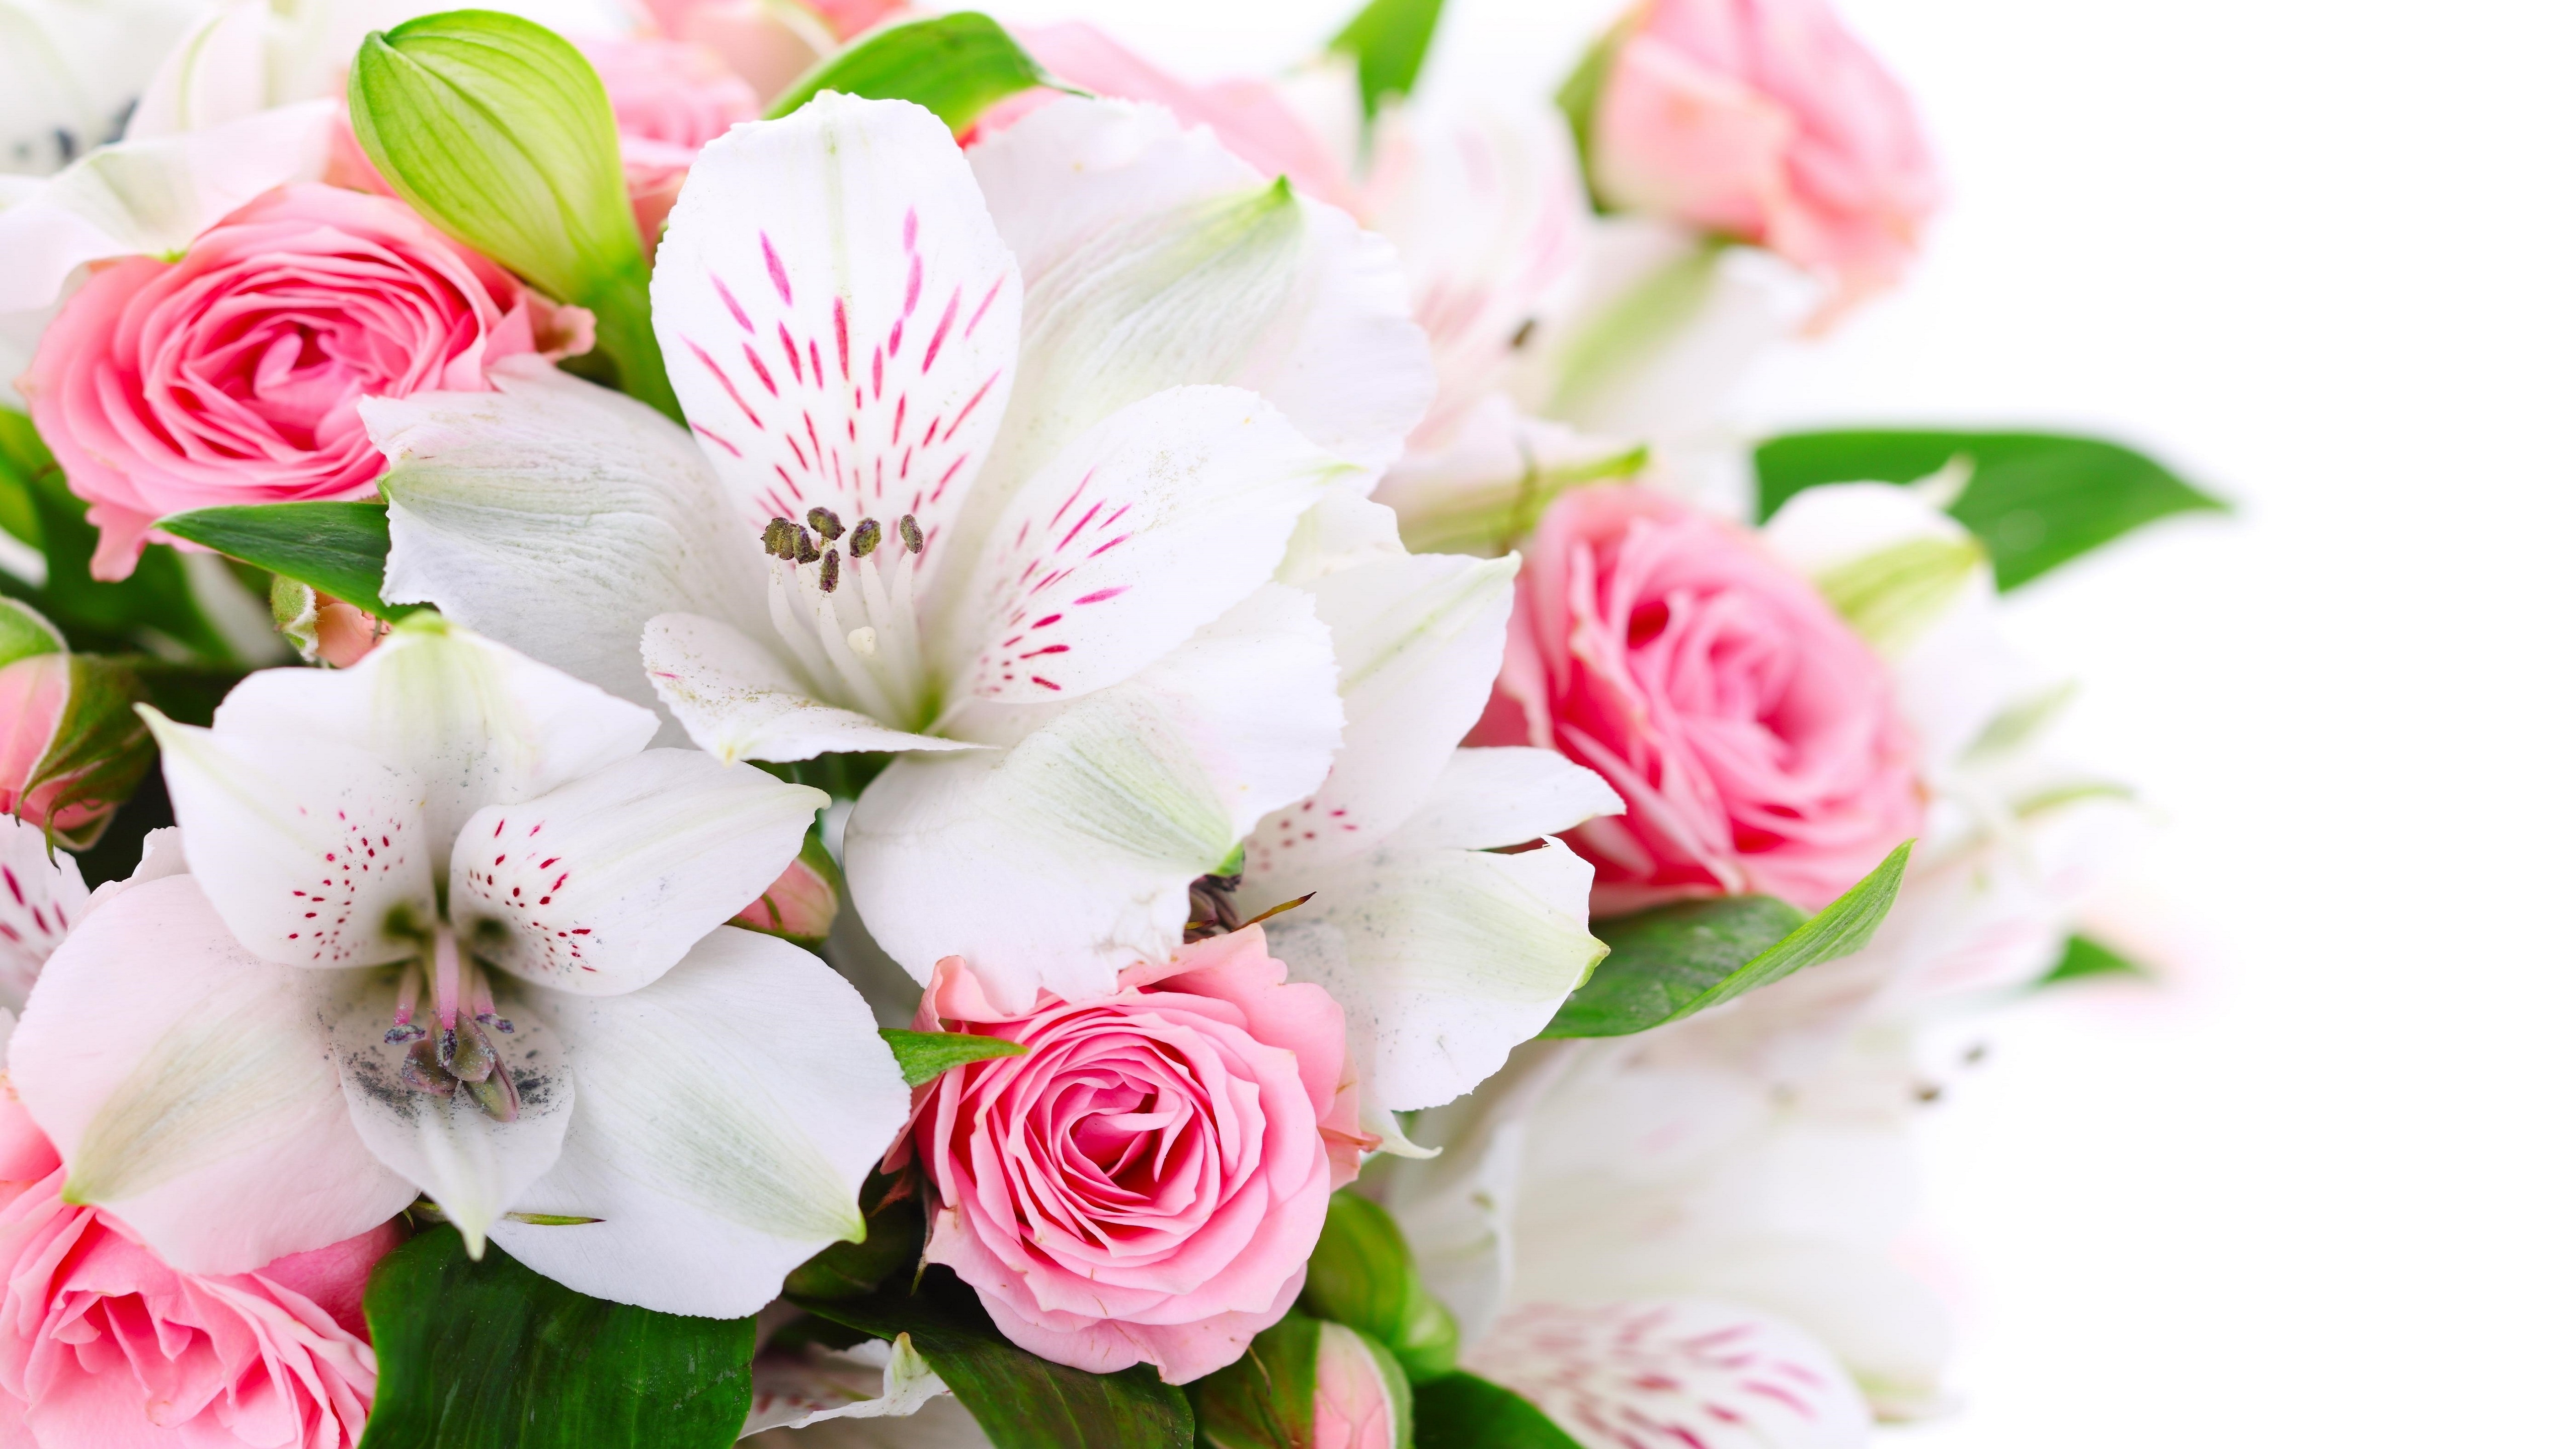 Pink Roses and White Lilies  for 5120 x 2880 5K Ultra HD resolution